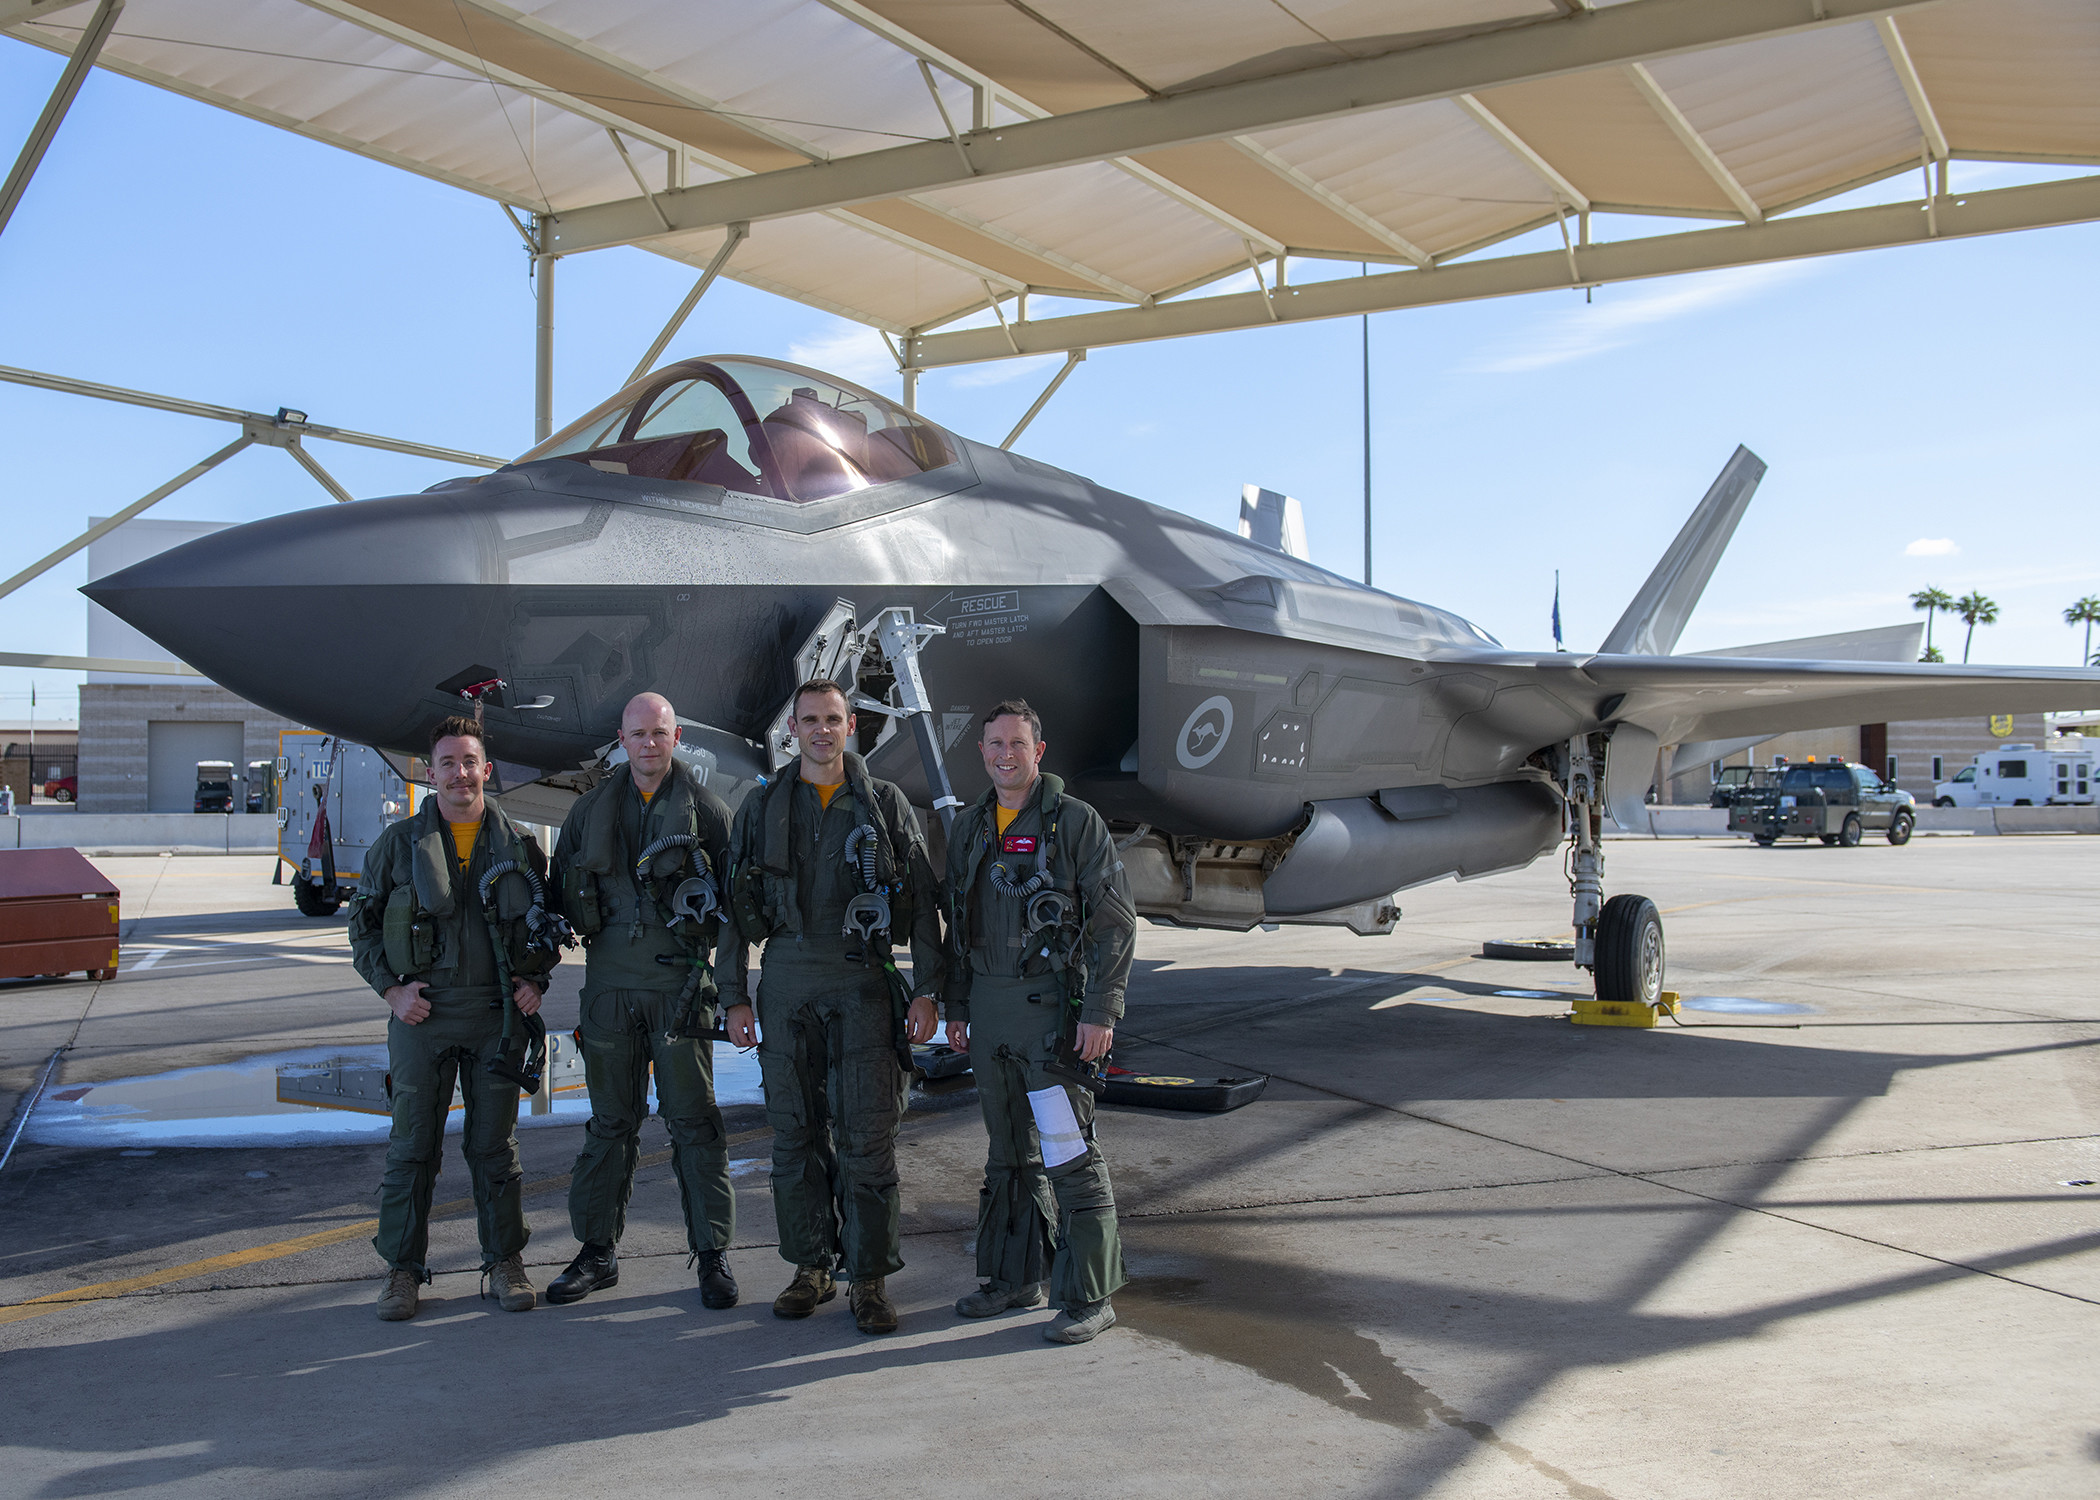 Royal Australian Air Force completes training mission, departs from